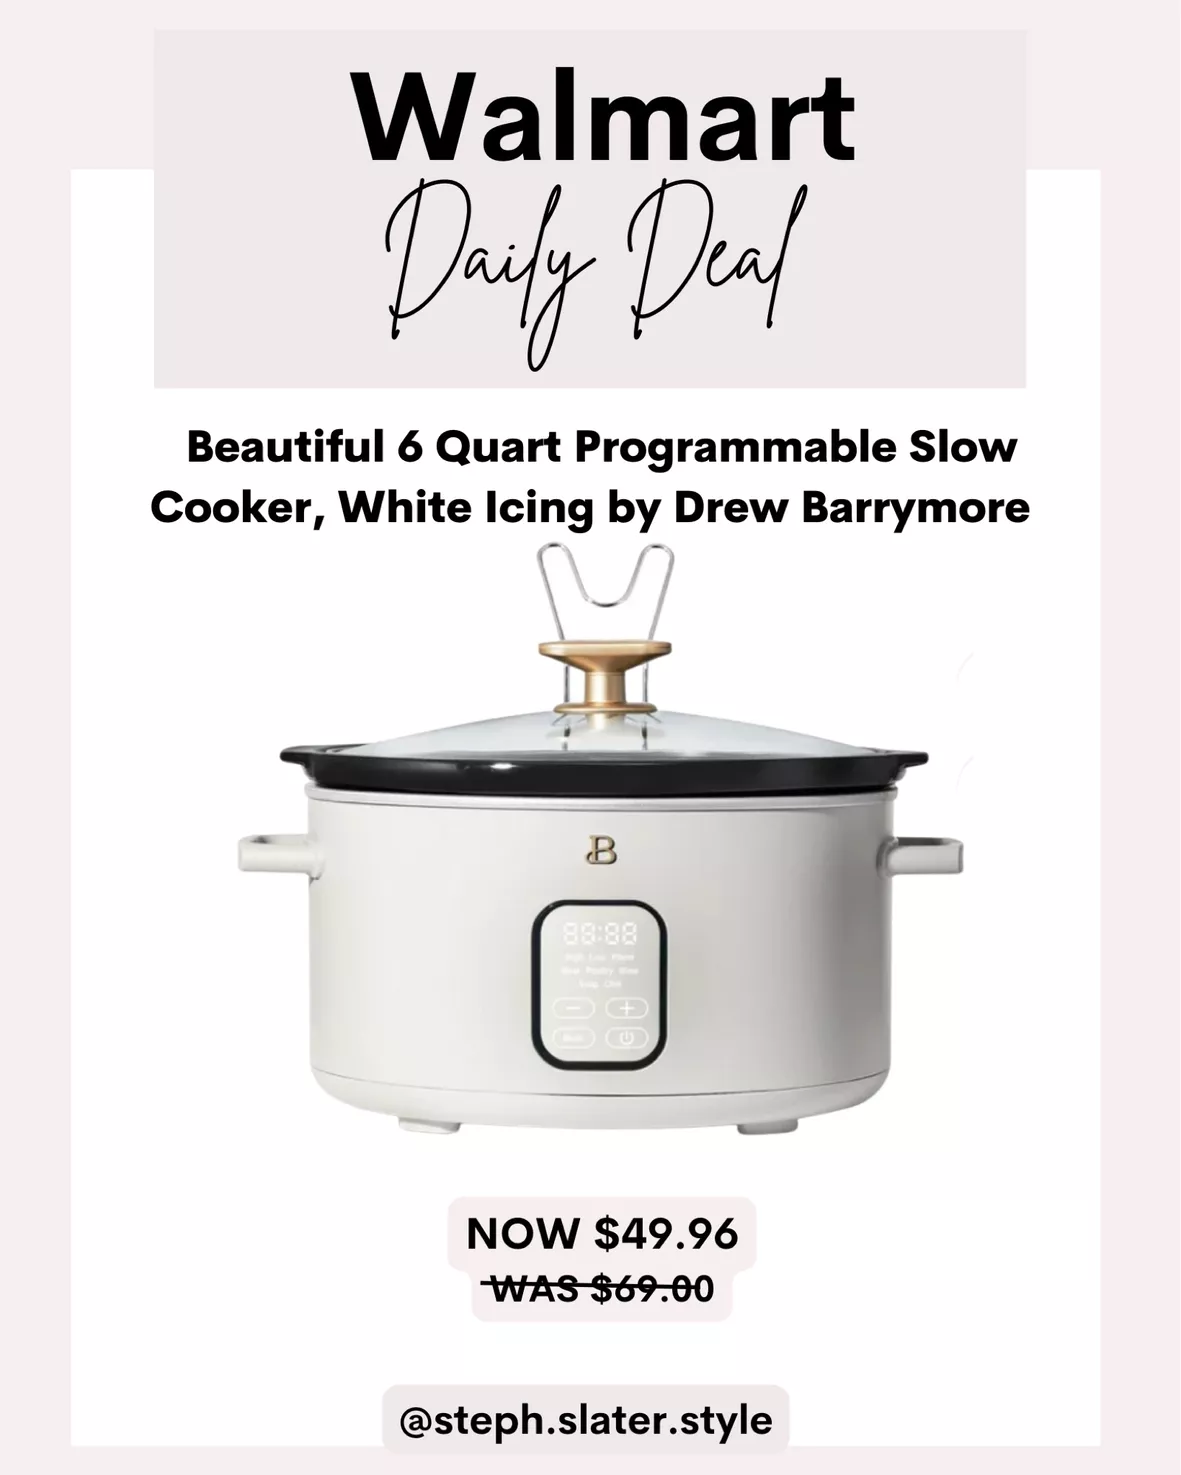  6 Quart Programmable Slow Cooker, White Icing by Drew